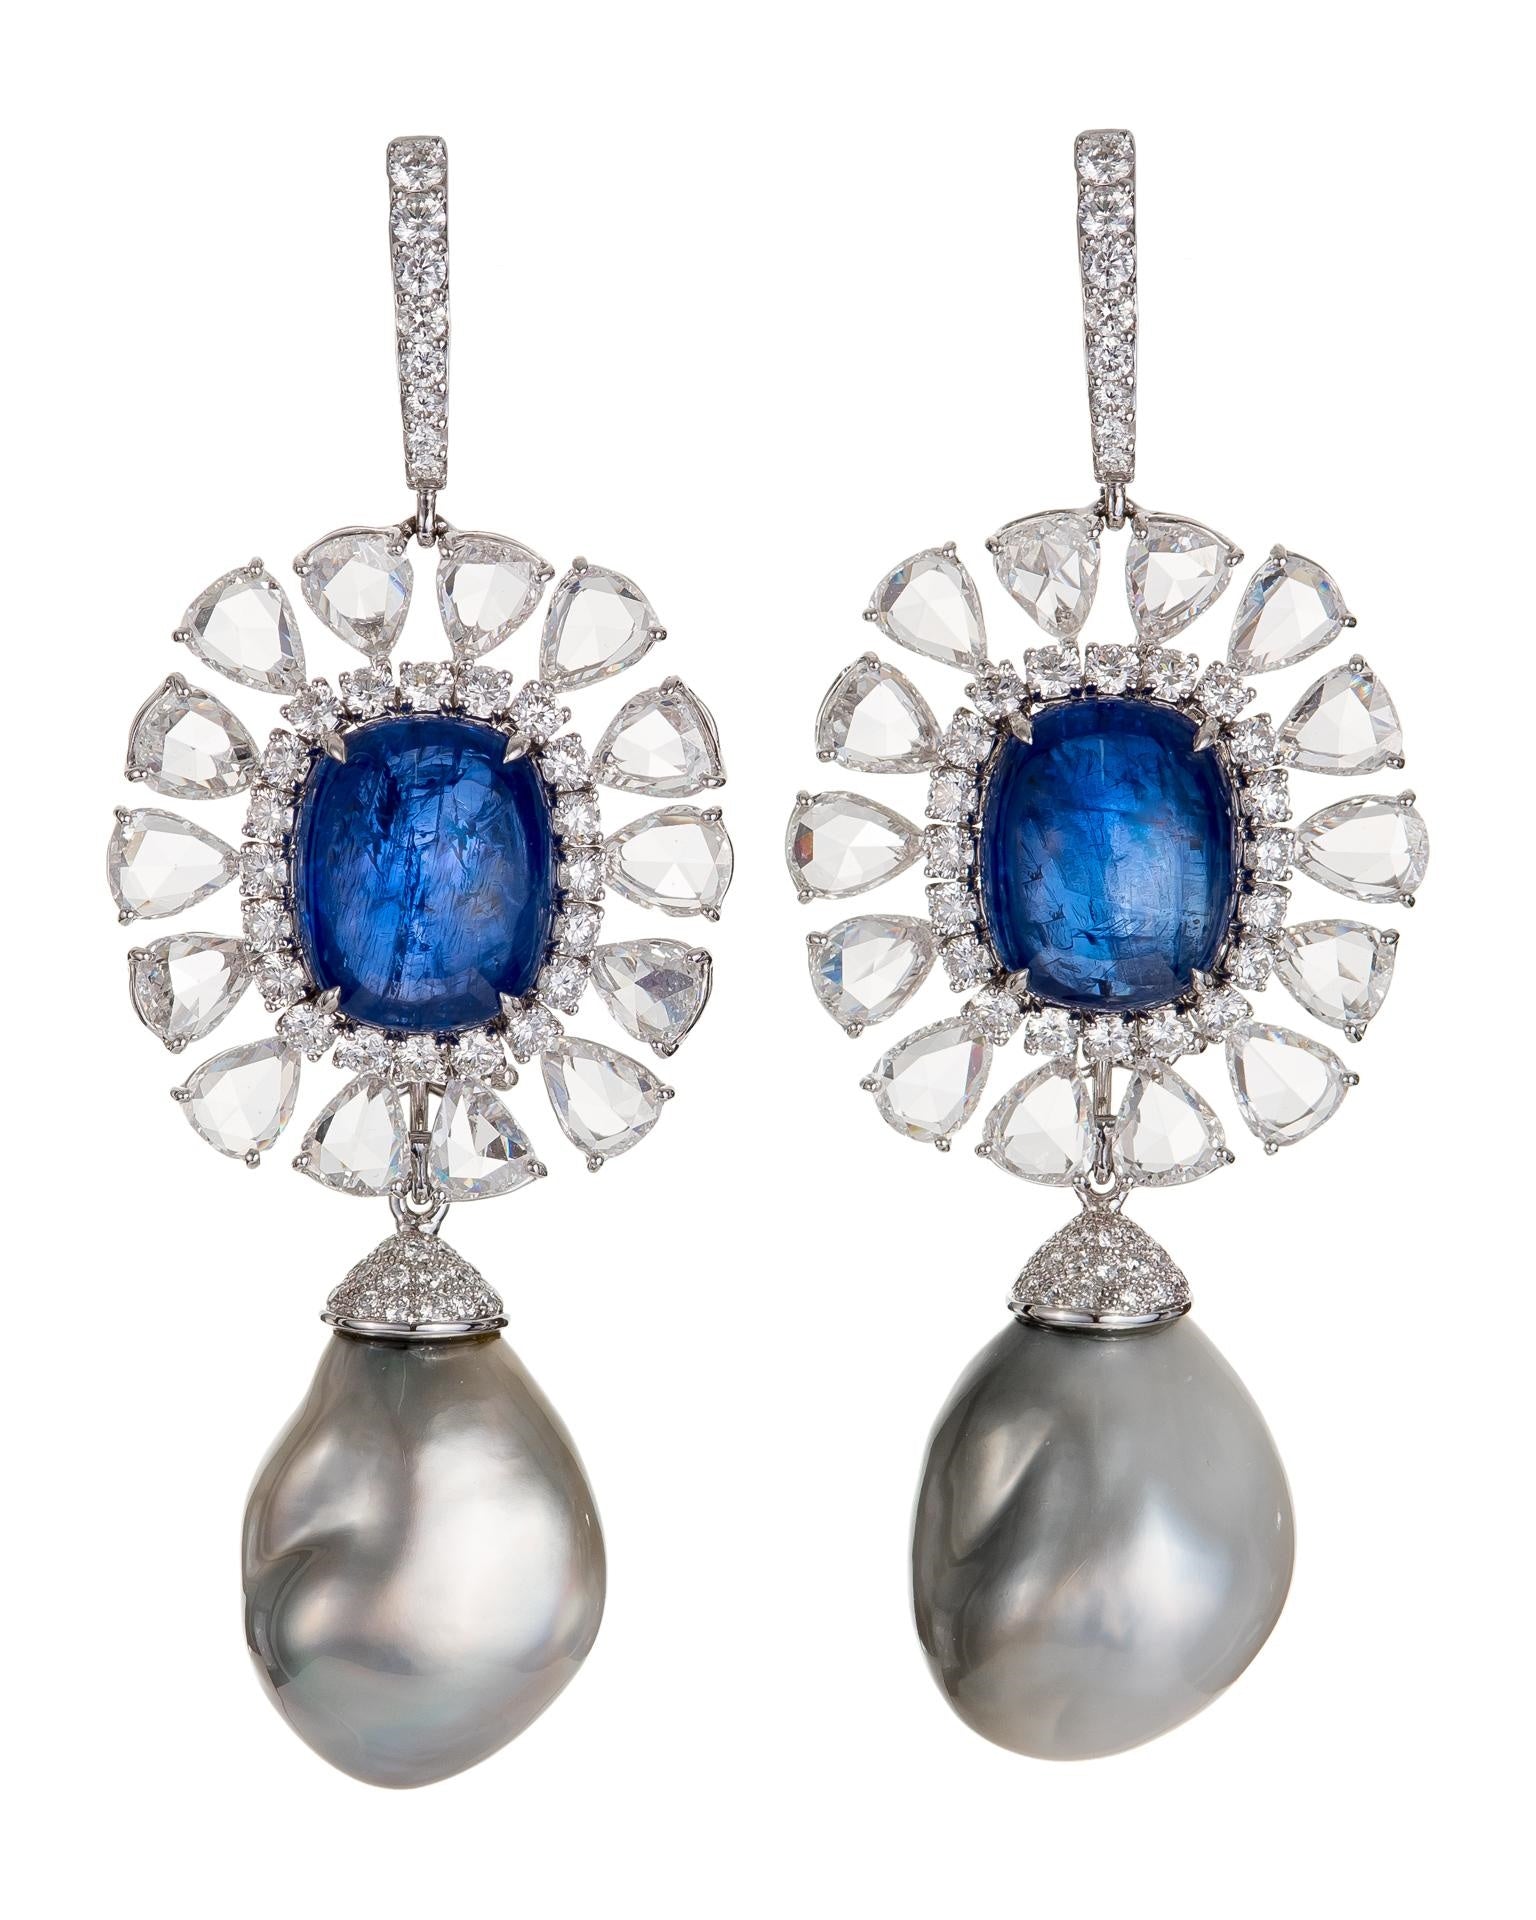 Elegant Cabochon Sapphire and Pearl Drop Earrings enhanced with rose cut and brilliant cut diamonds